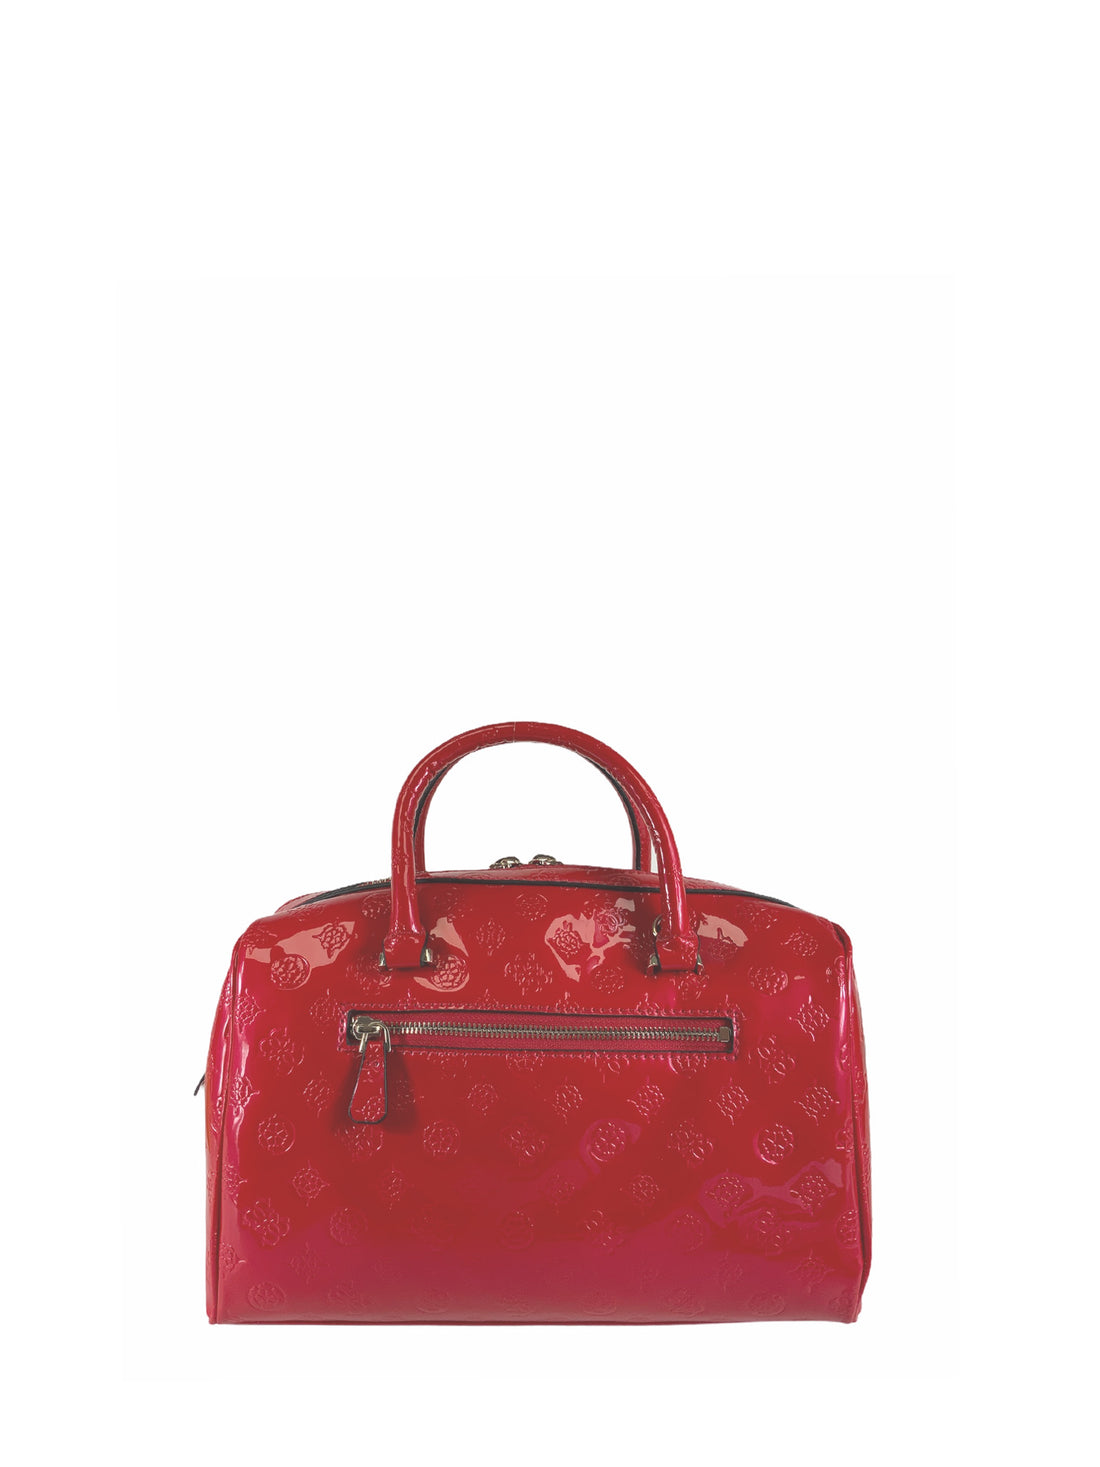 Bauletto Rosso Guess